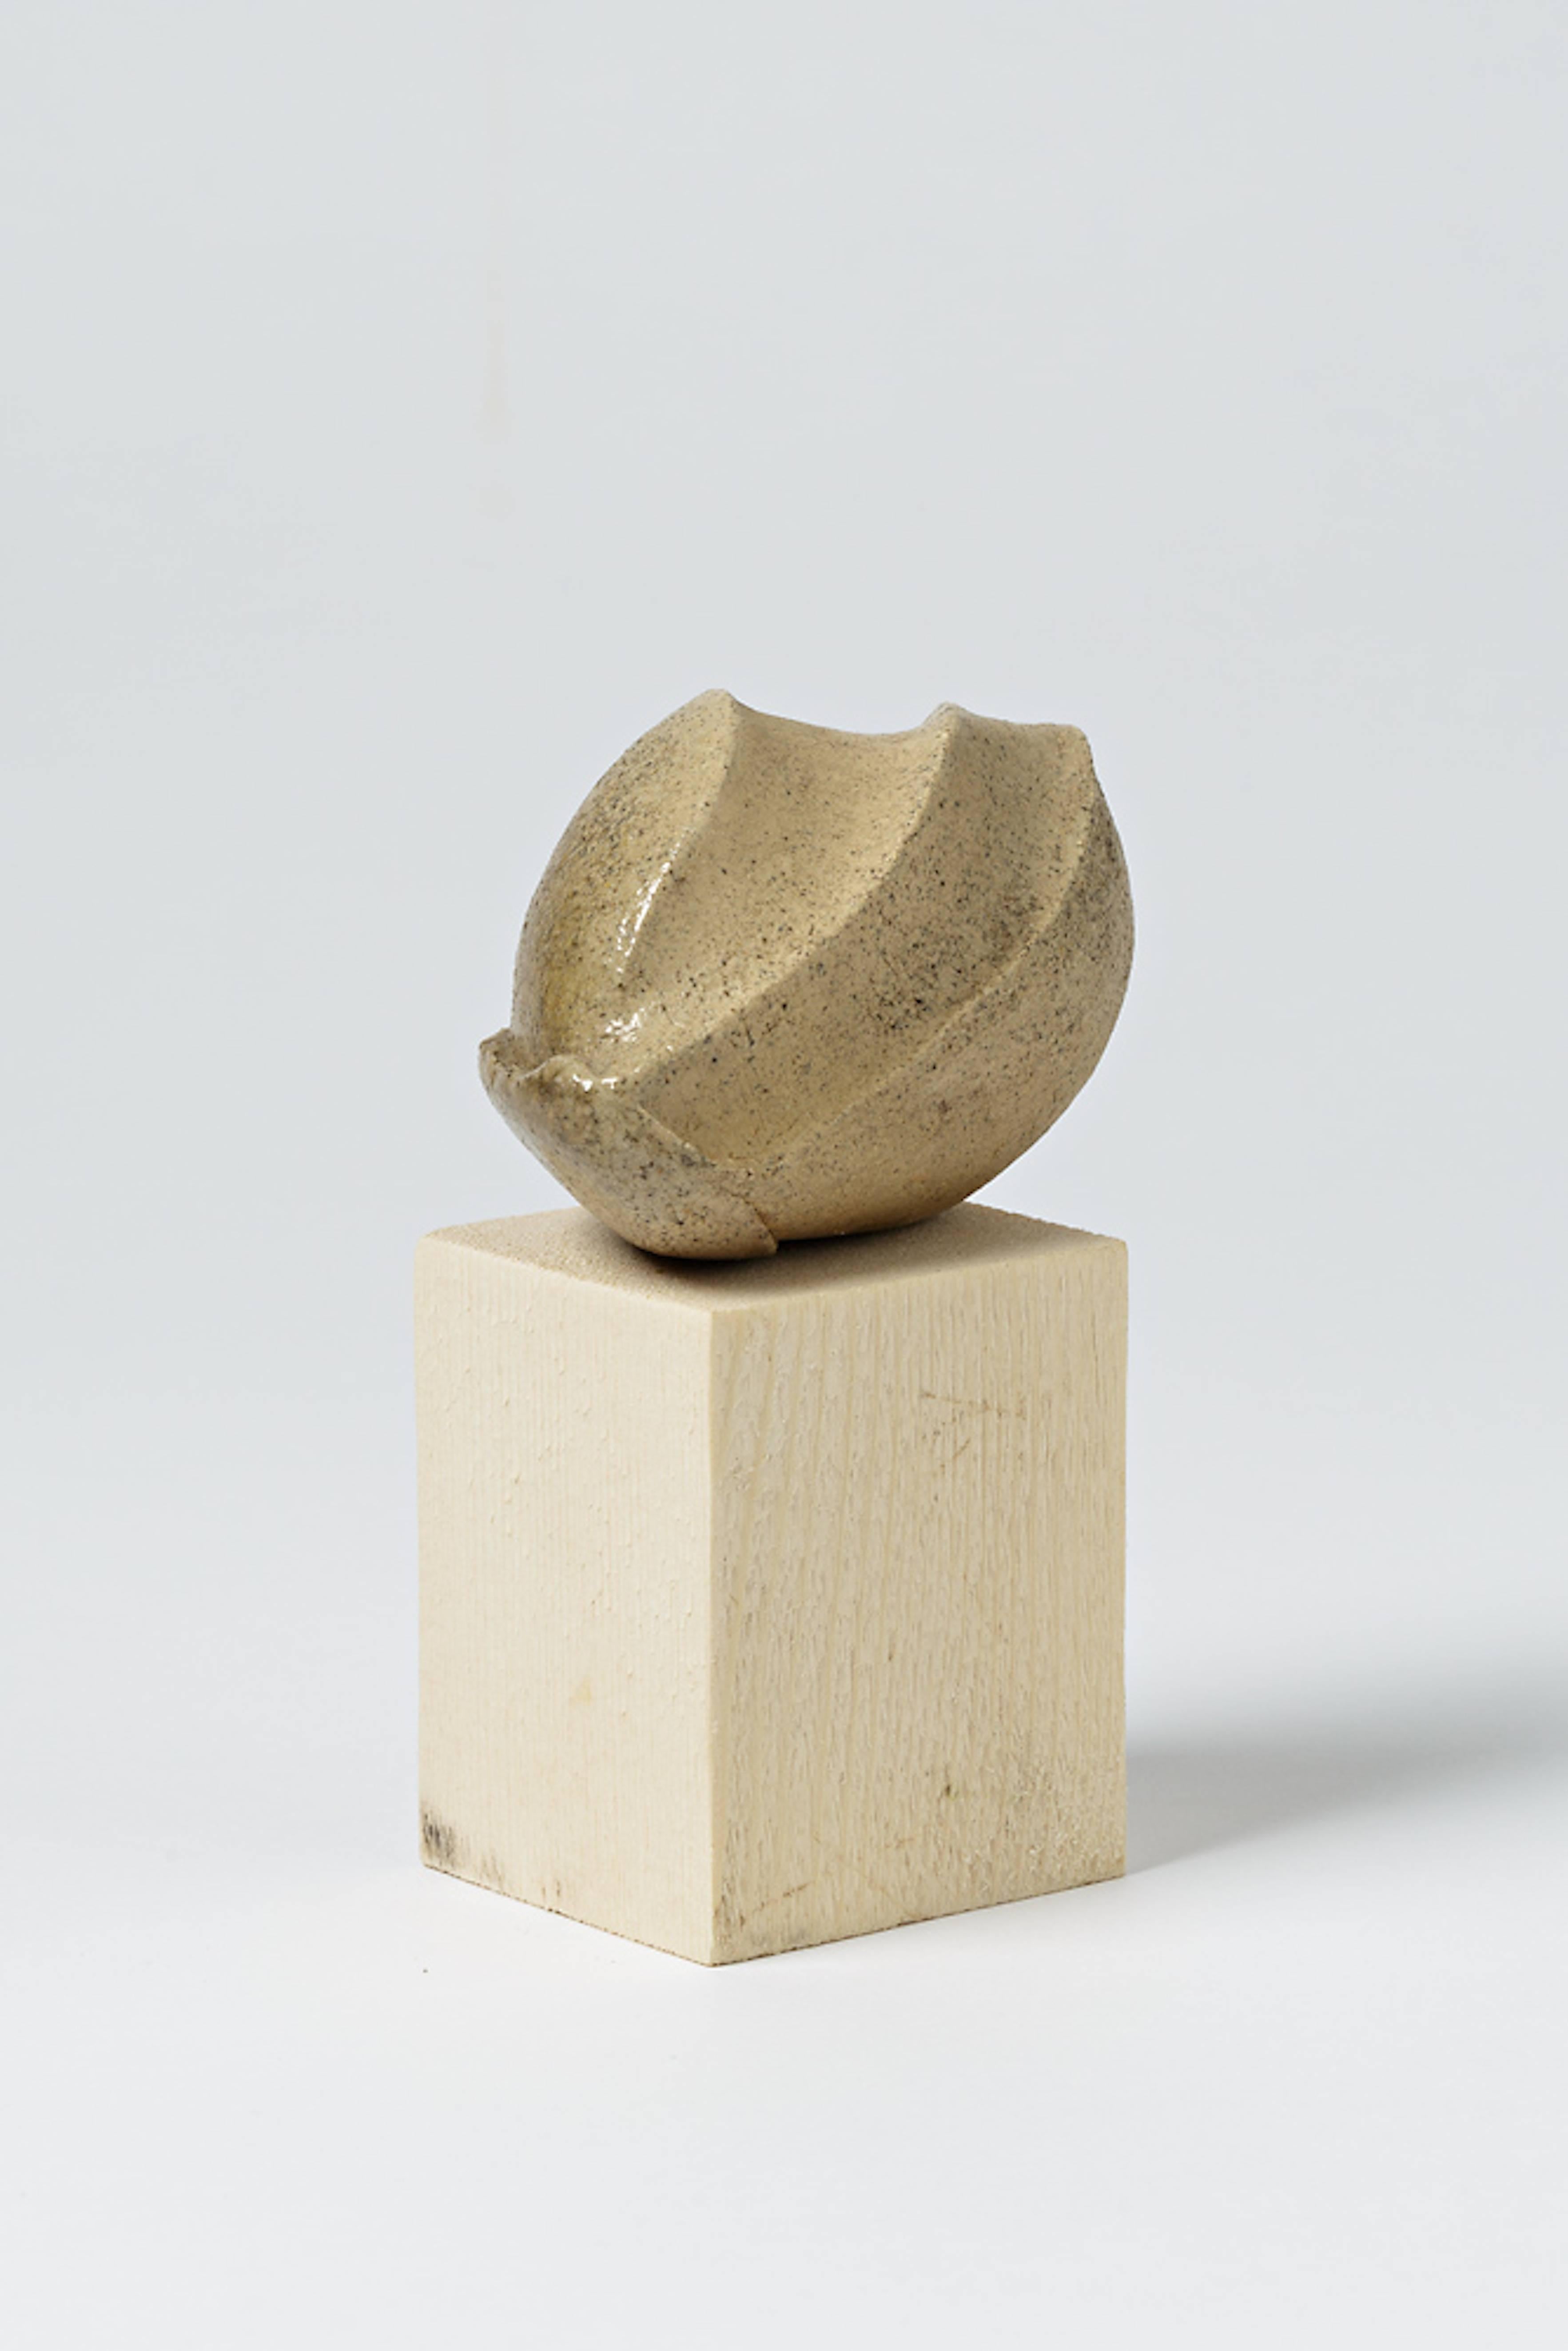 French Small Ceramic Sculpture by Elisabeth Joulia, circa 1981